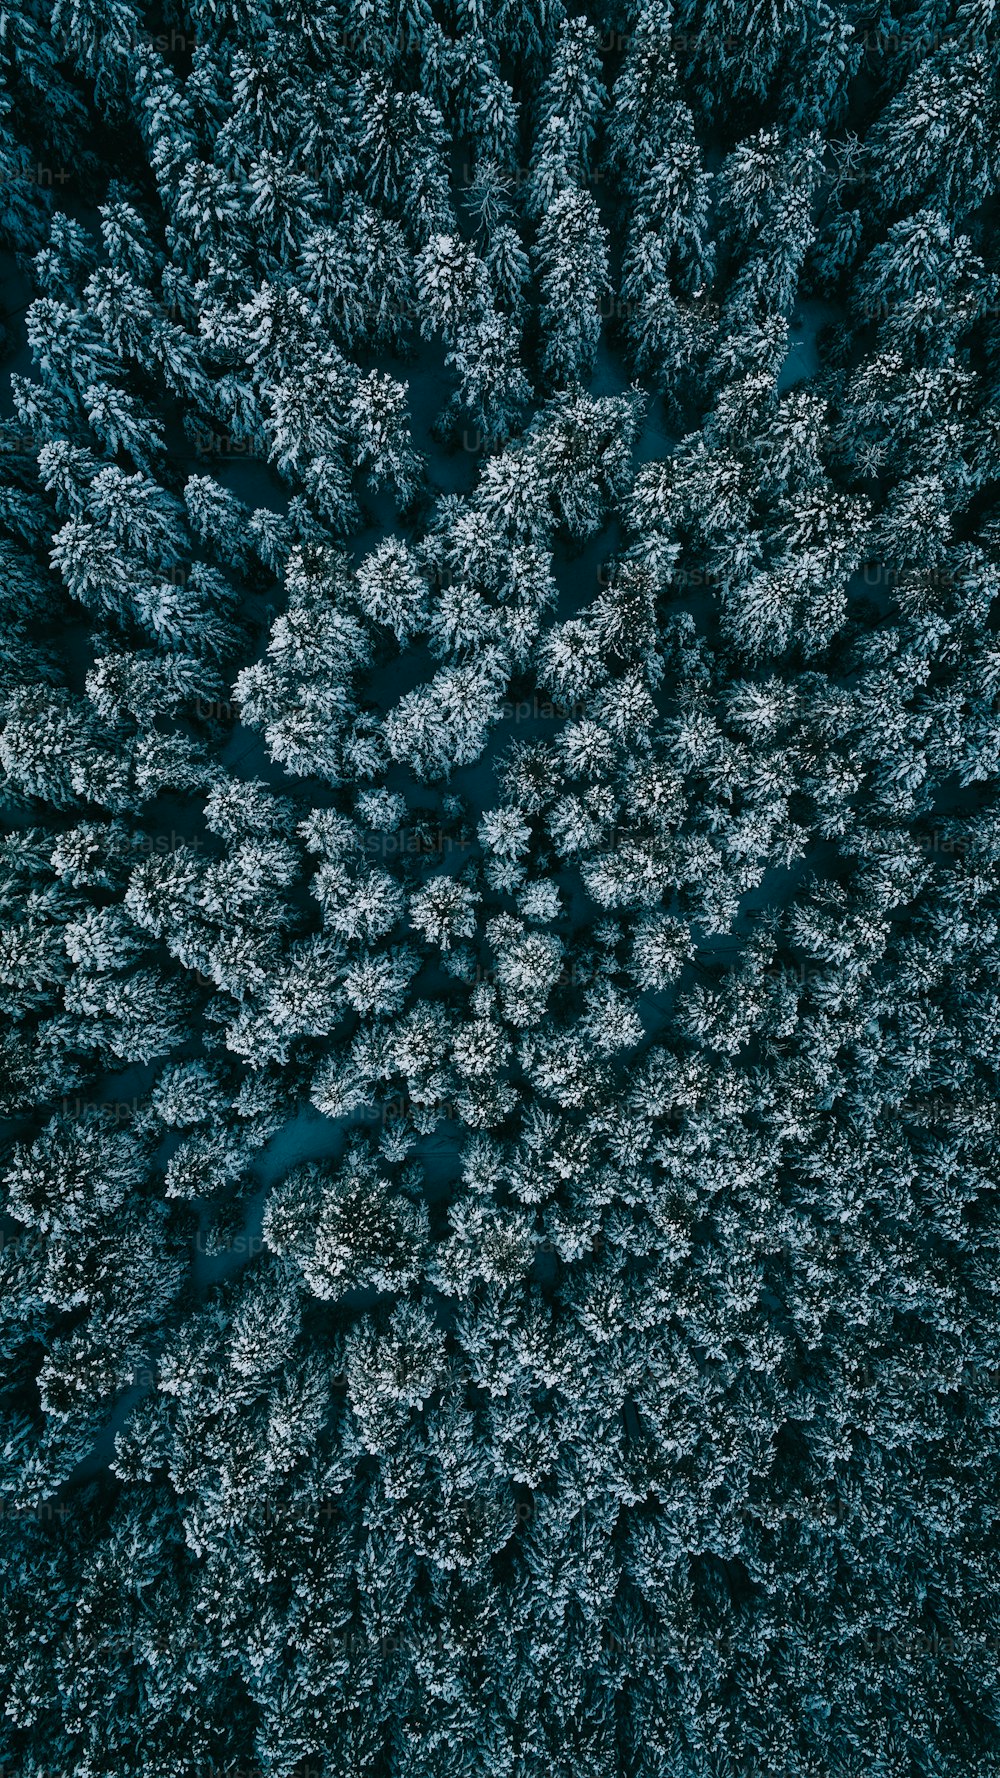 a group of trees that are standing in the snow